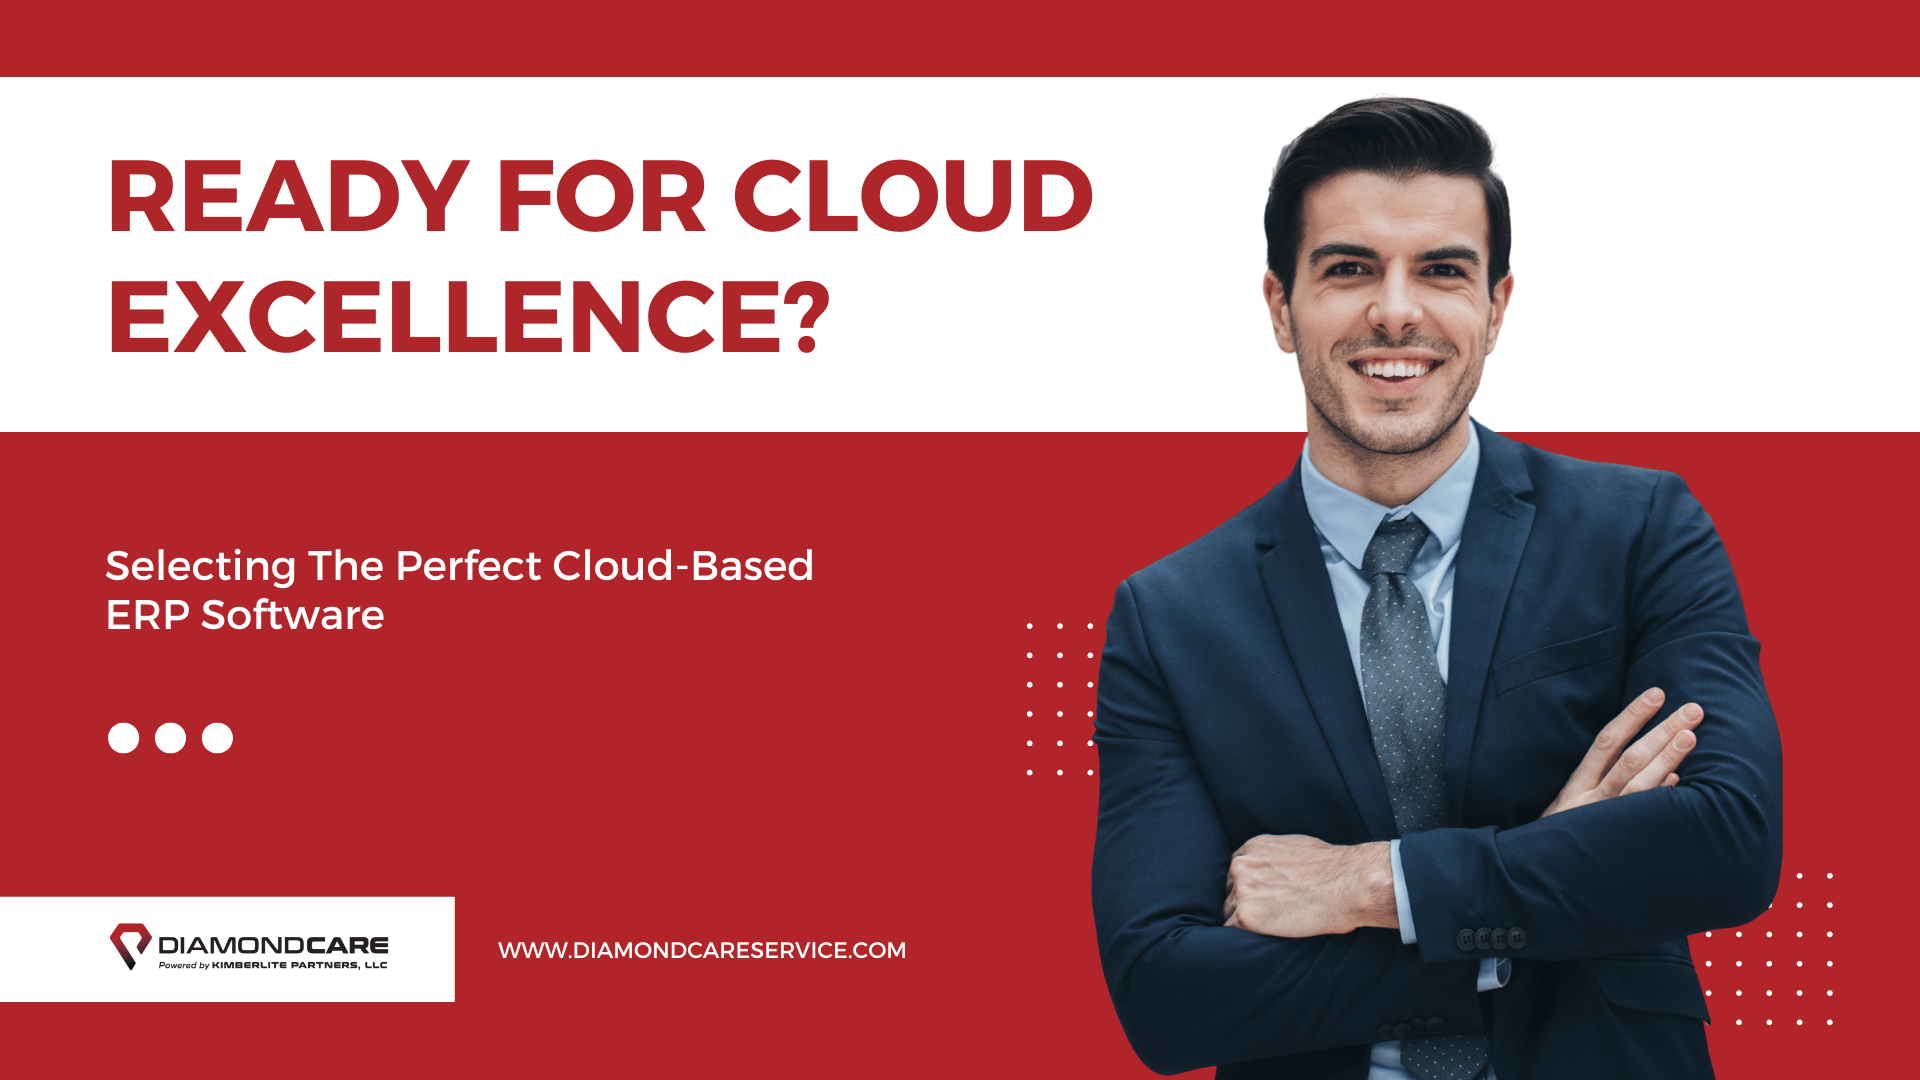 Your Ultimate Guide to Selecting the Perfect Cloud-Based ERP Software